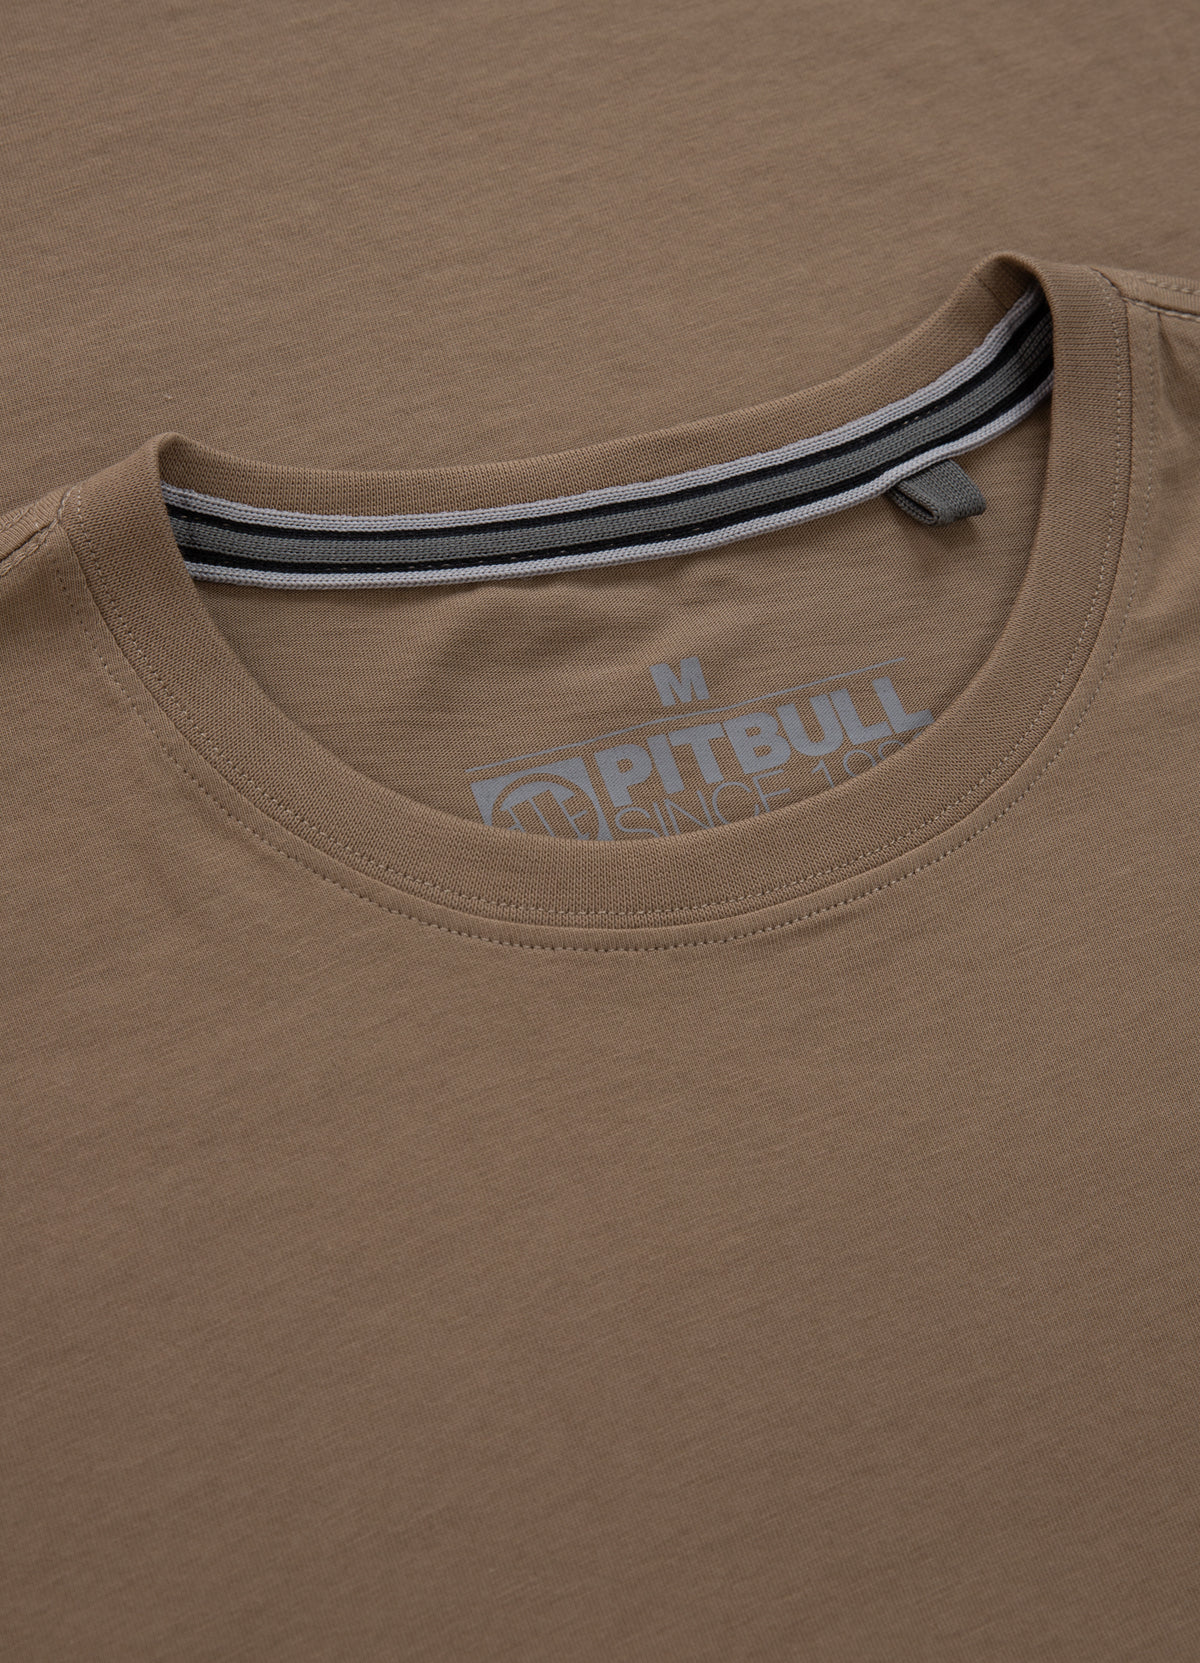 SMALL LOGO Lightweight Coyote Brown T-shirt